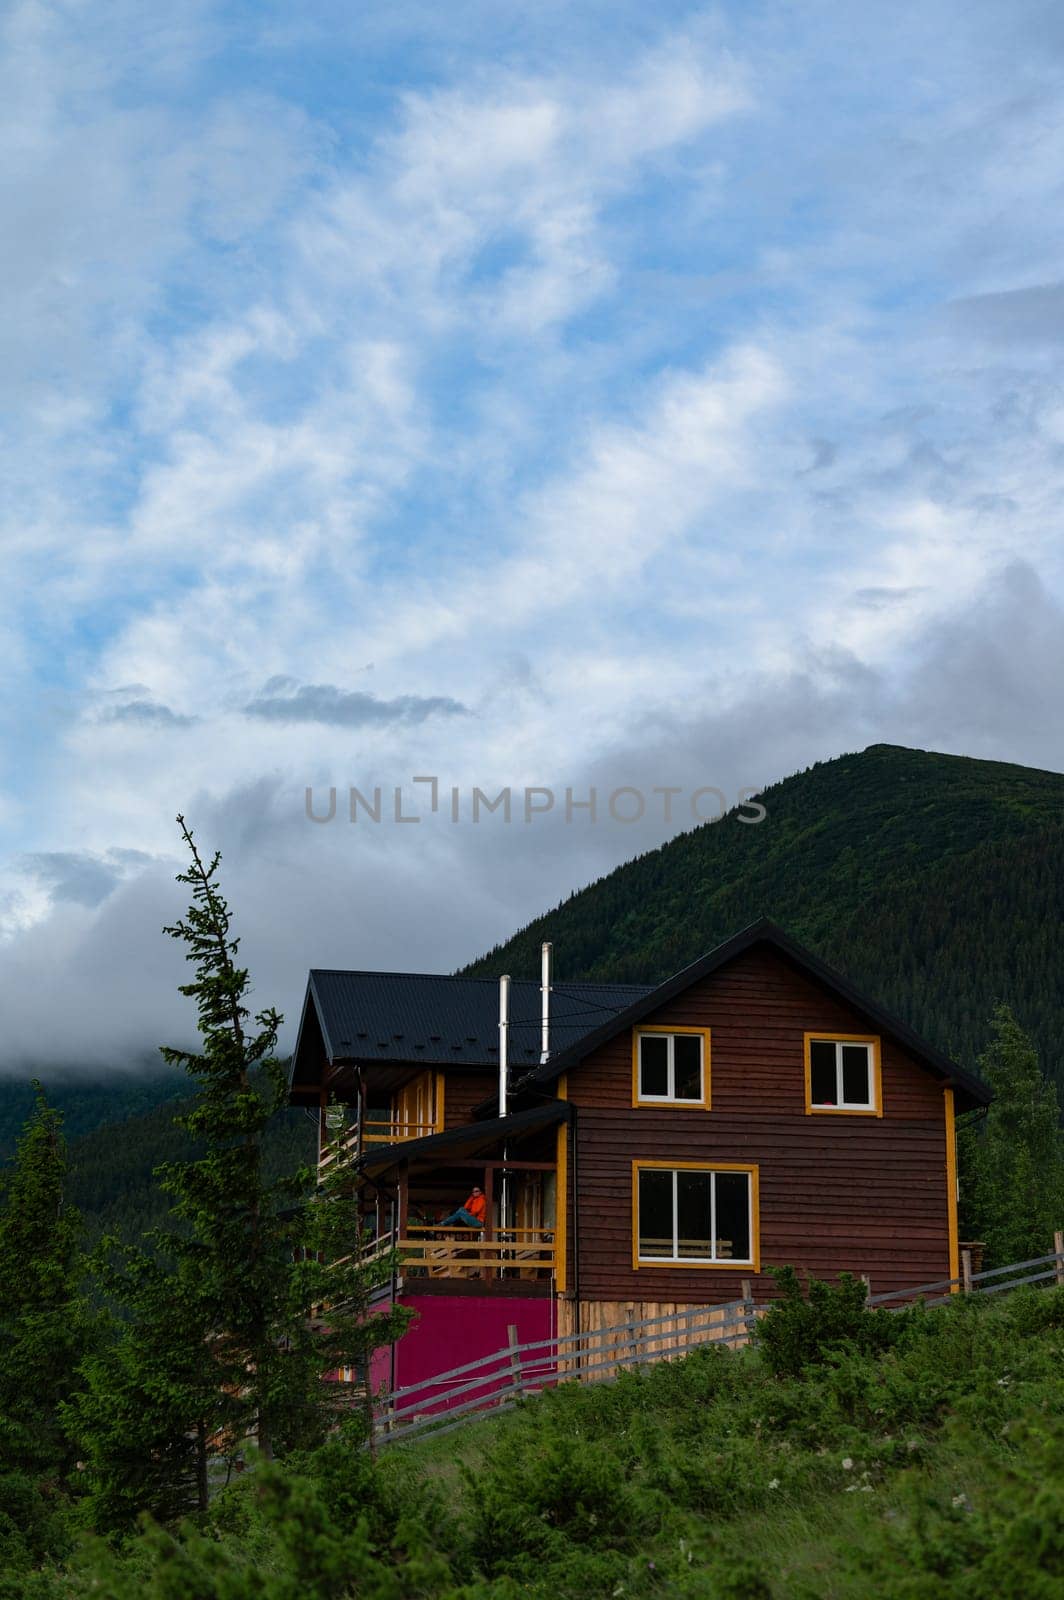 A large wooden house for tourists in the mountains, a young girl stands on the terrace against the background of the Carpathian Mountains, a house for recreation in the mountains.